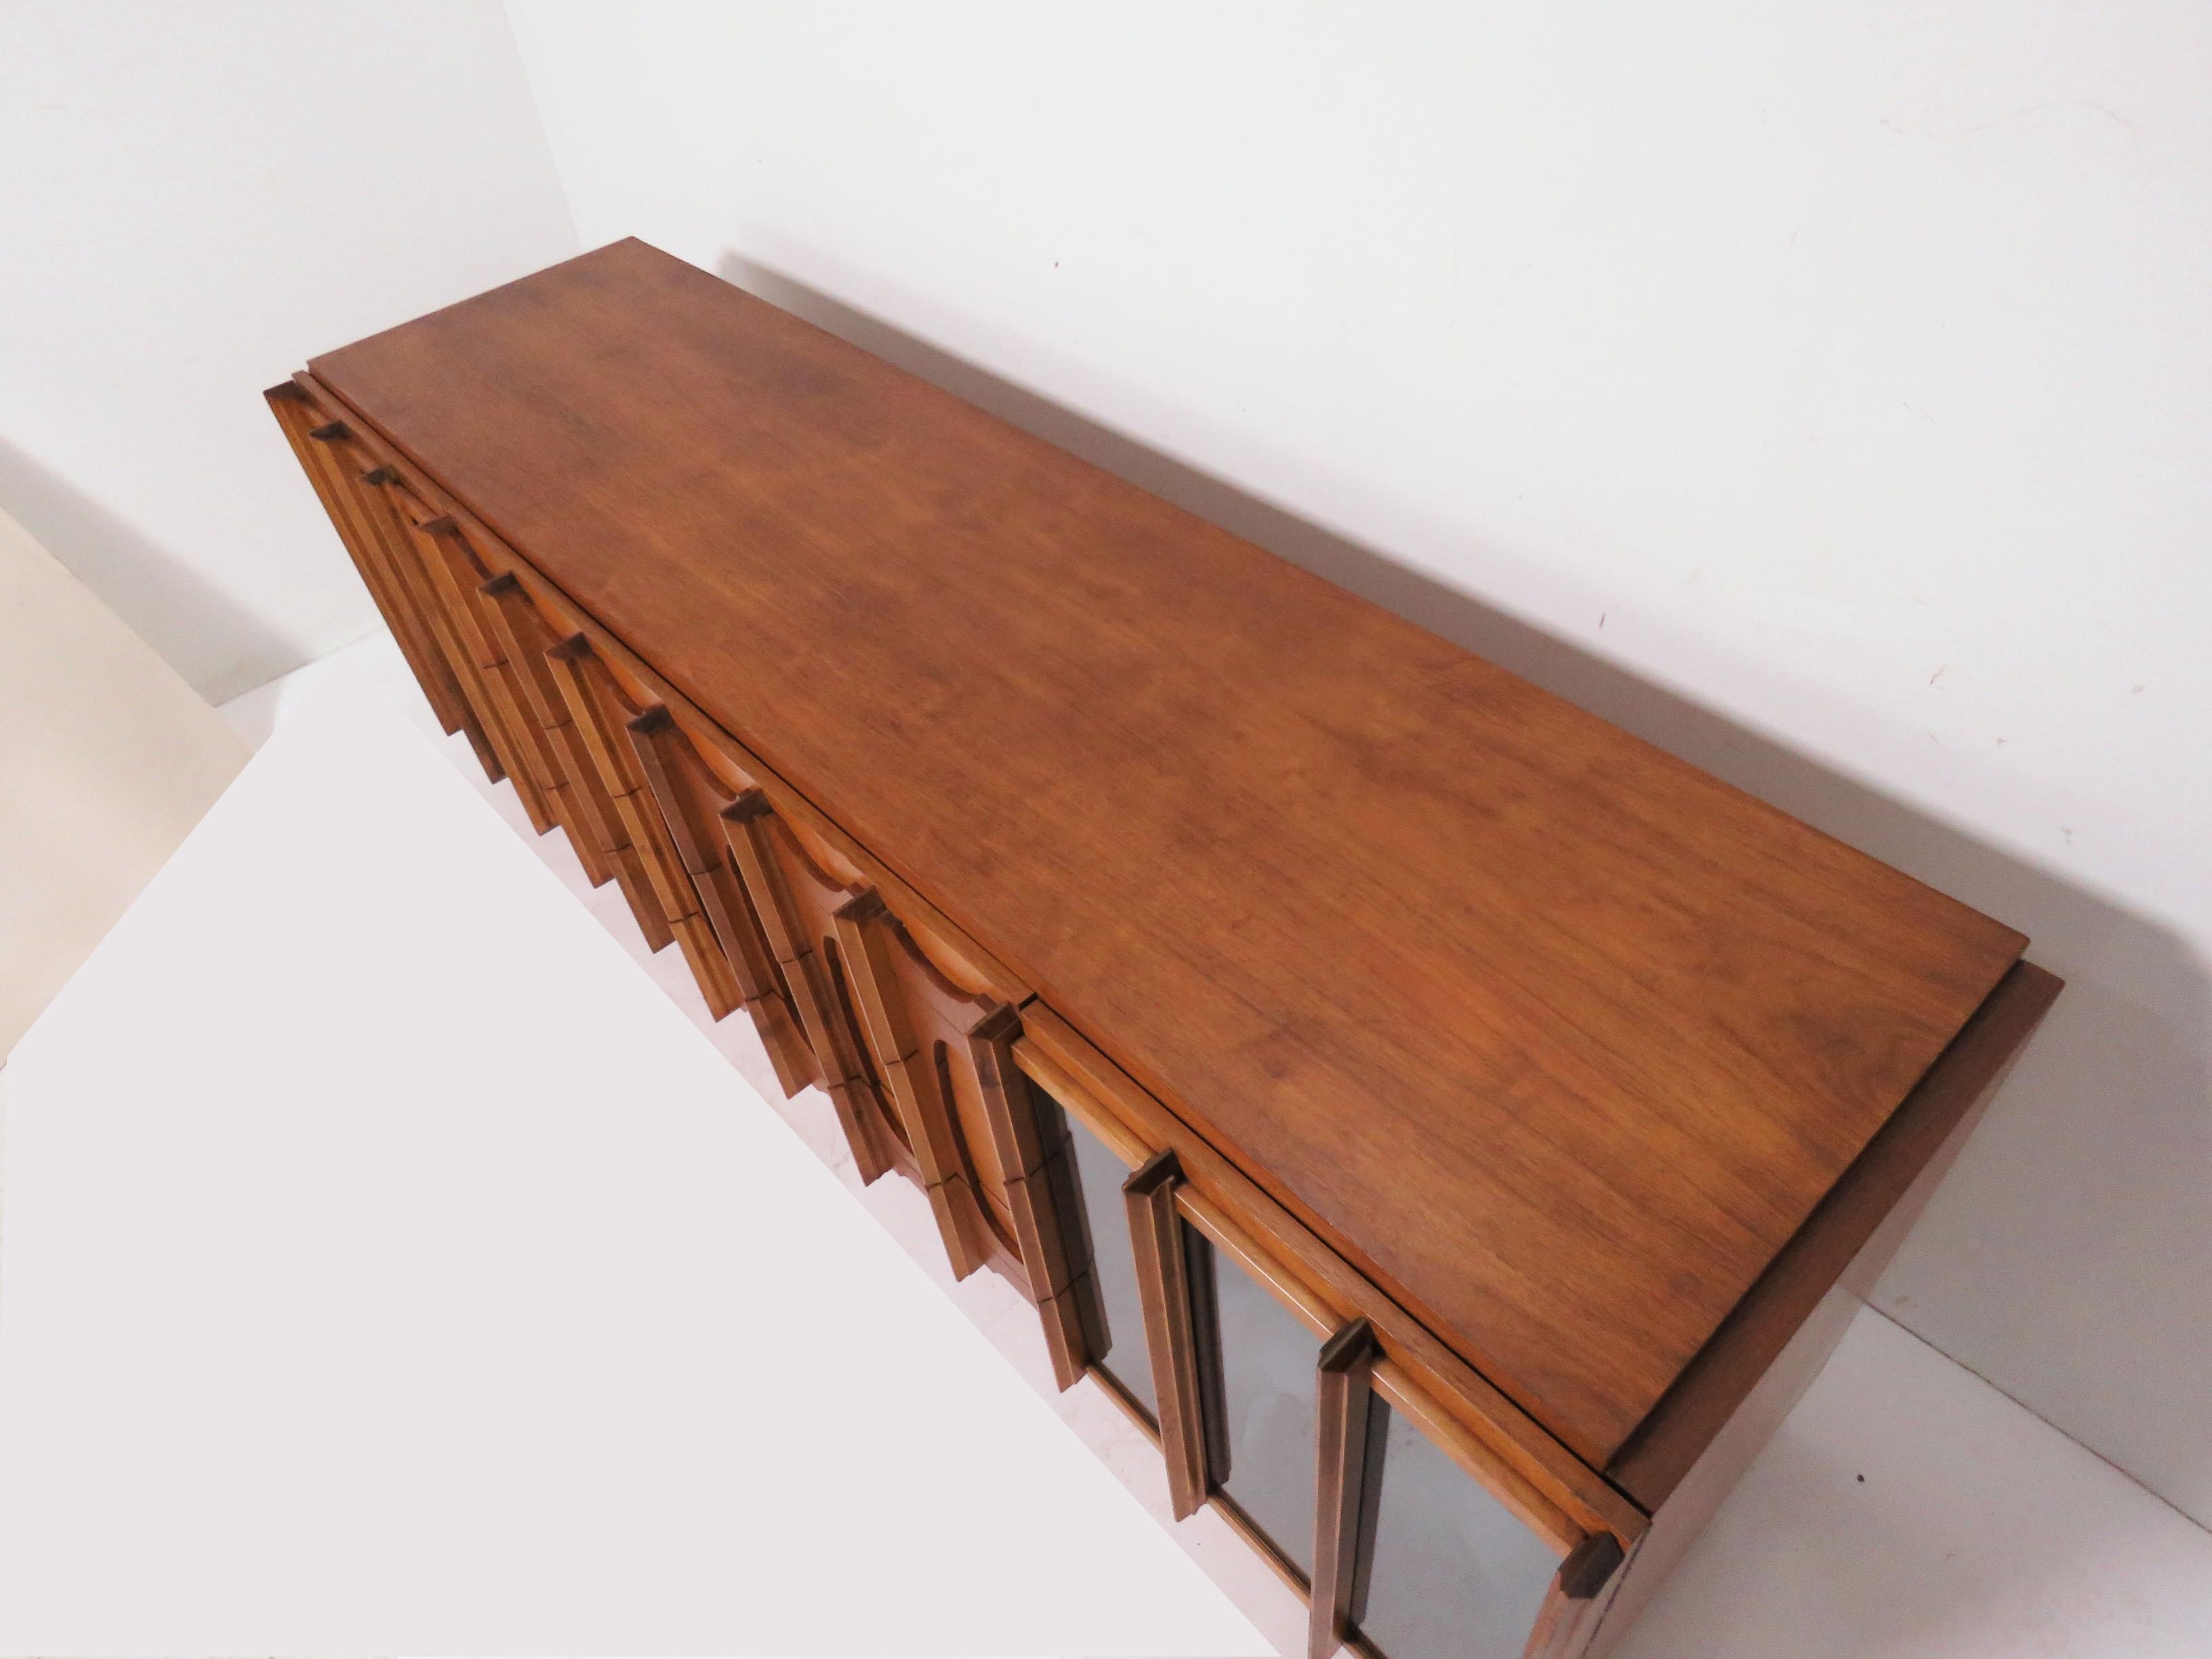 A mid-1960s credenza style dressing cabinet in teak and bleached walnut with smoked mirror door fronts by Tabago Furniture of Montreal, Canada (often incorrectly referred to as “Tobago”). Known for their sculptural designs influenced by the North